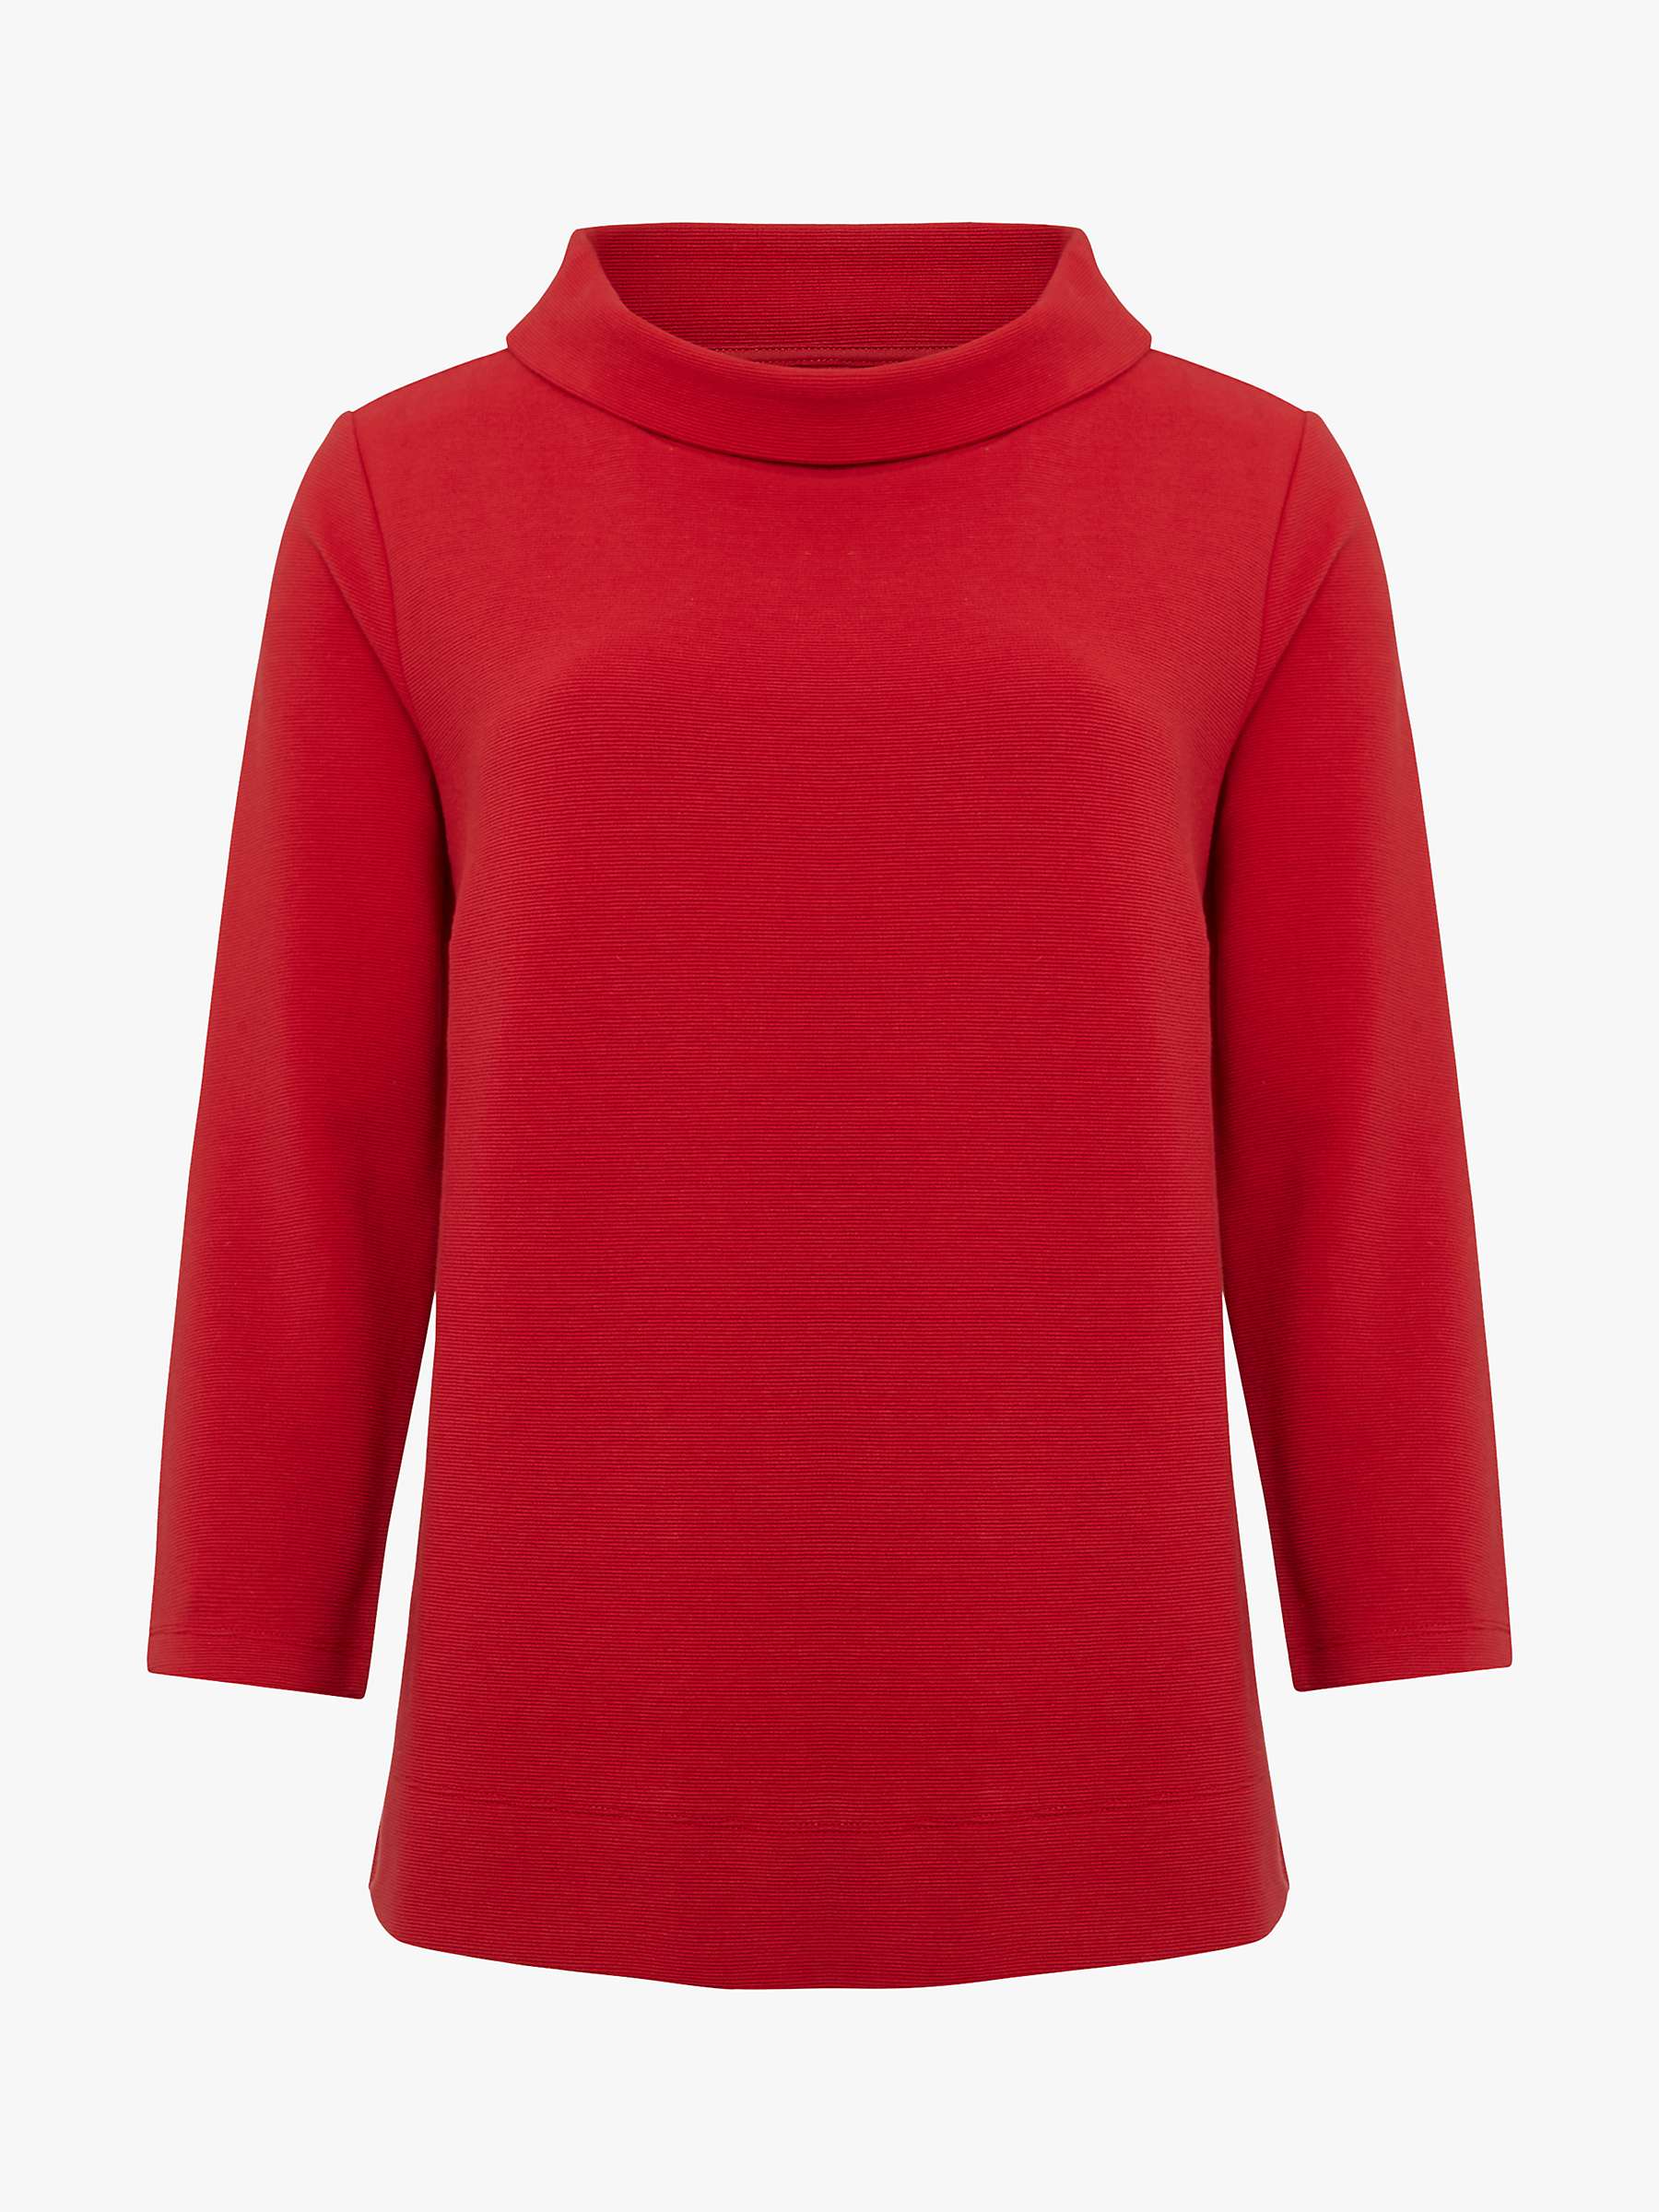 Buy Hobbs Betsy Roll Neck Top Online at johnlewis.com